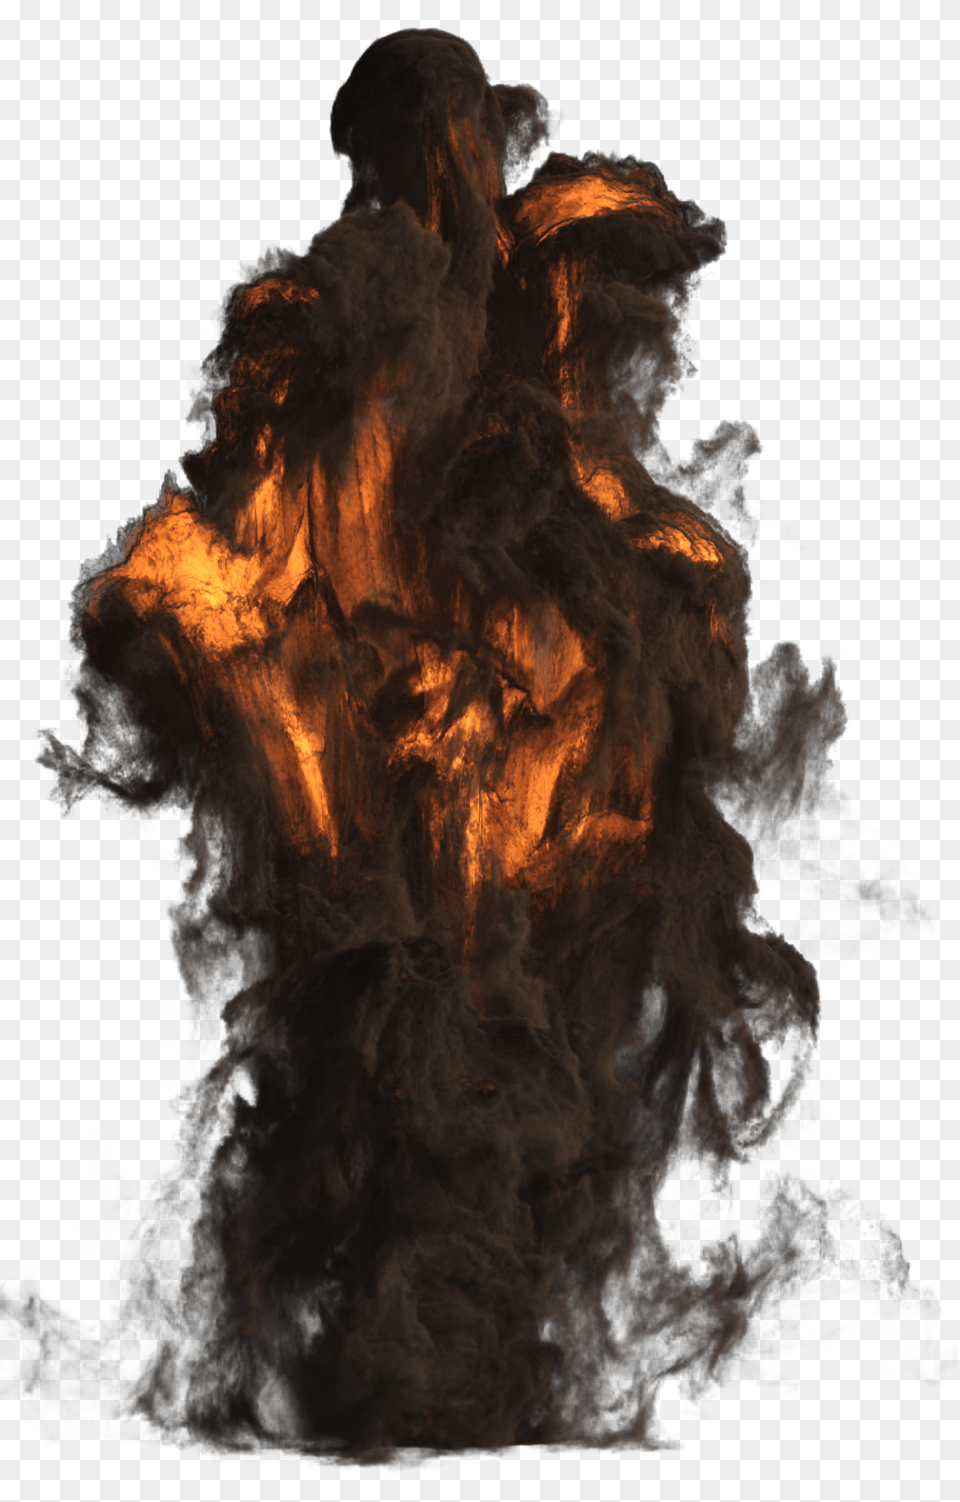 Explosion Png Image